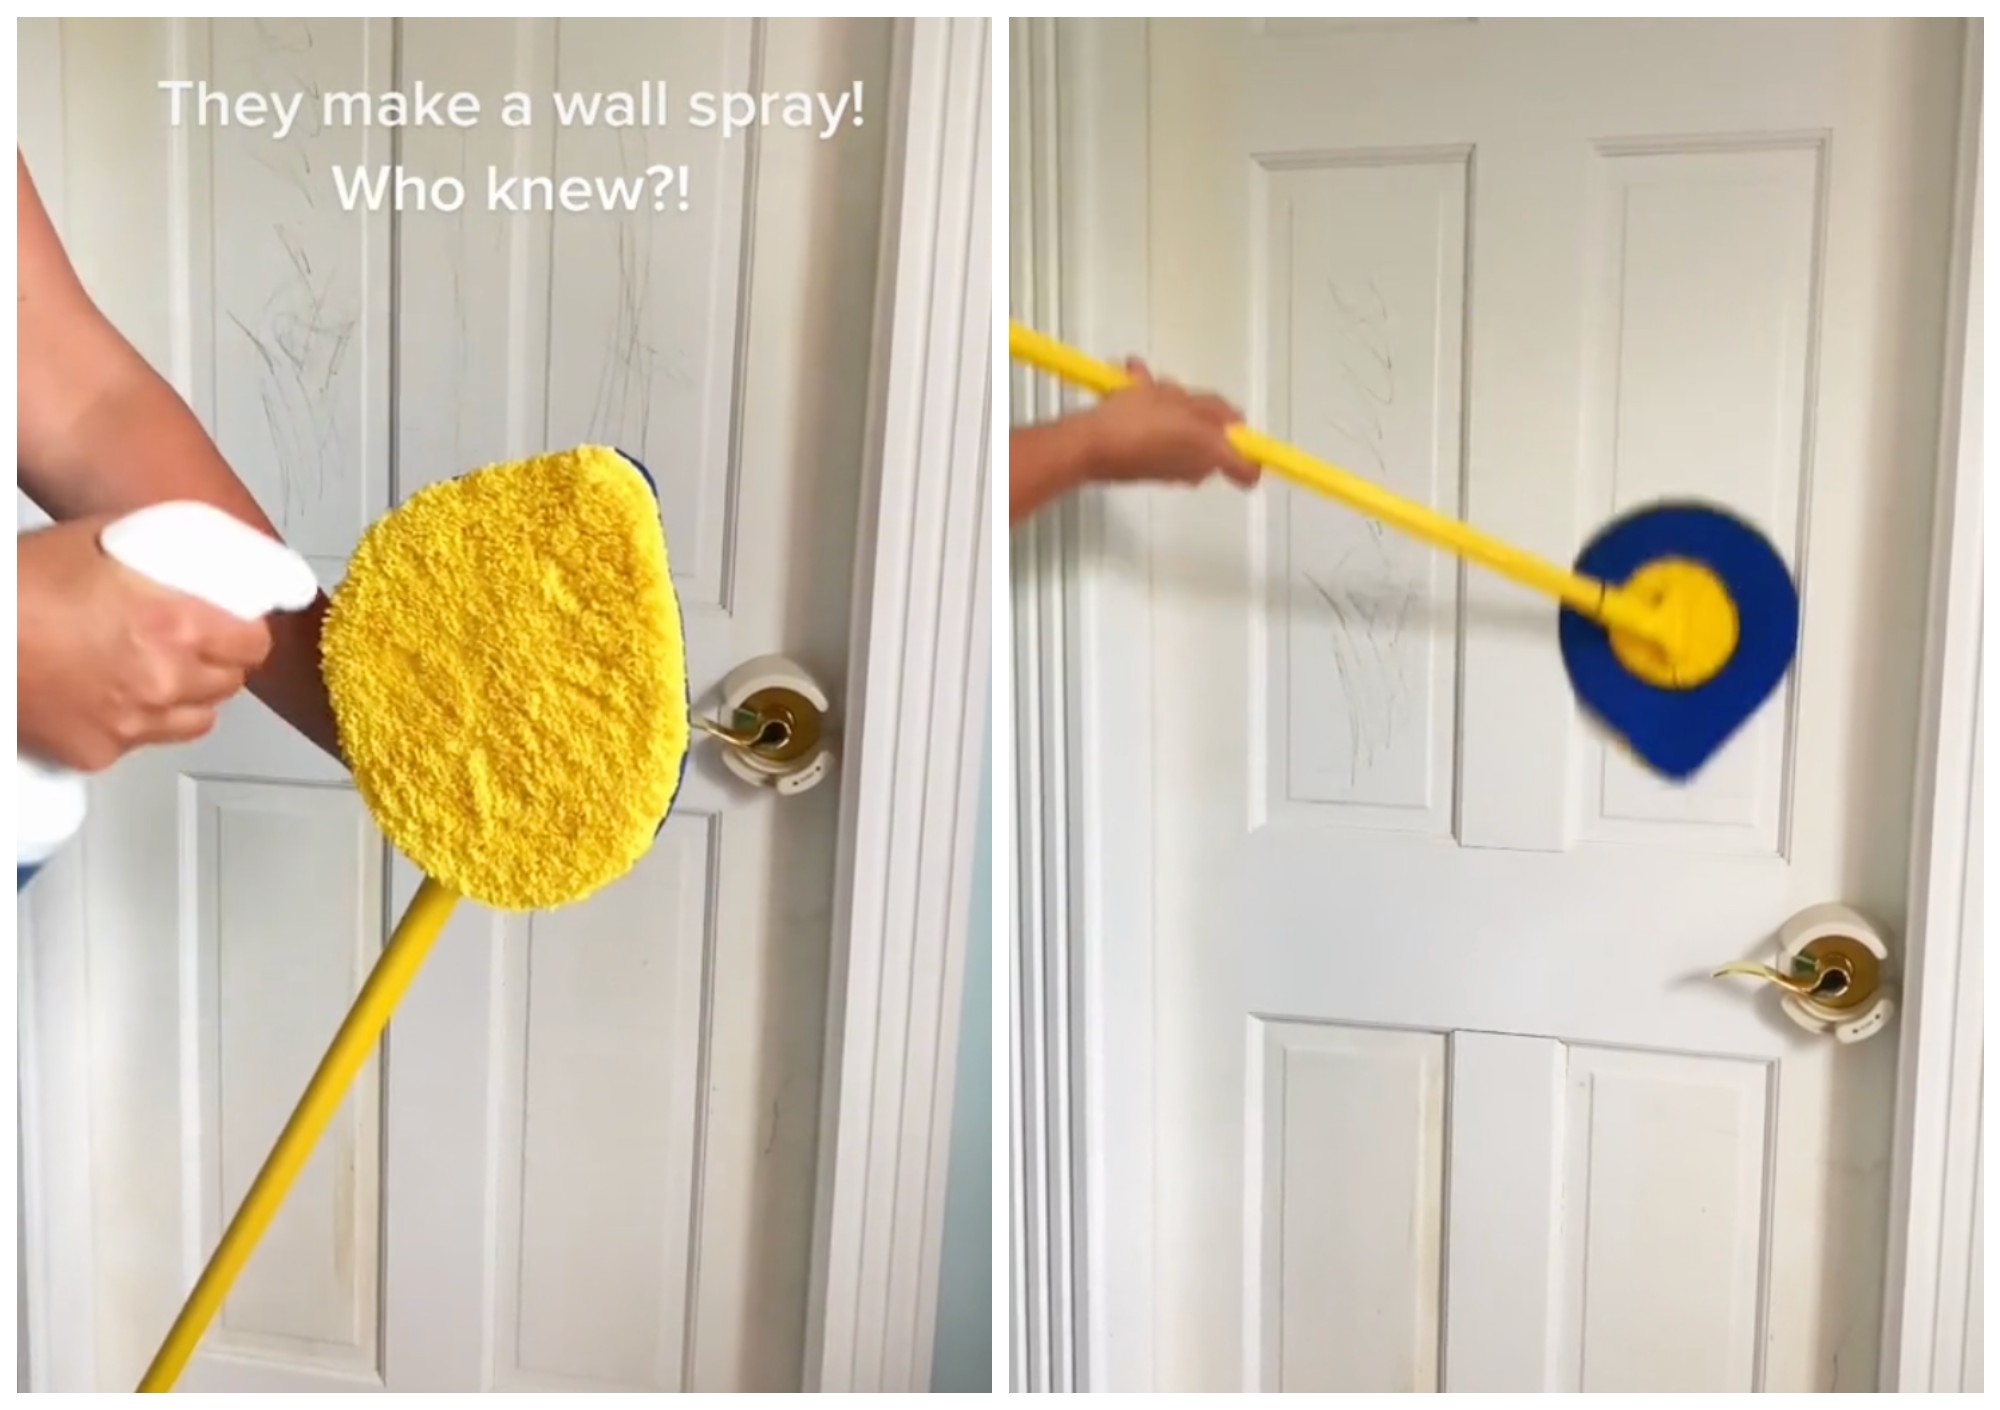 How to Buy the Viral Wall Mop and Wall Cleaner Spray from TikTok